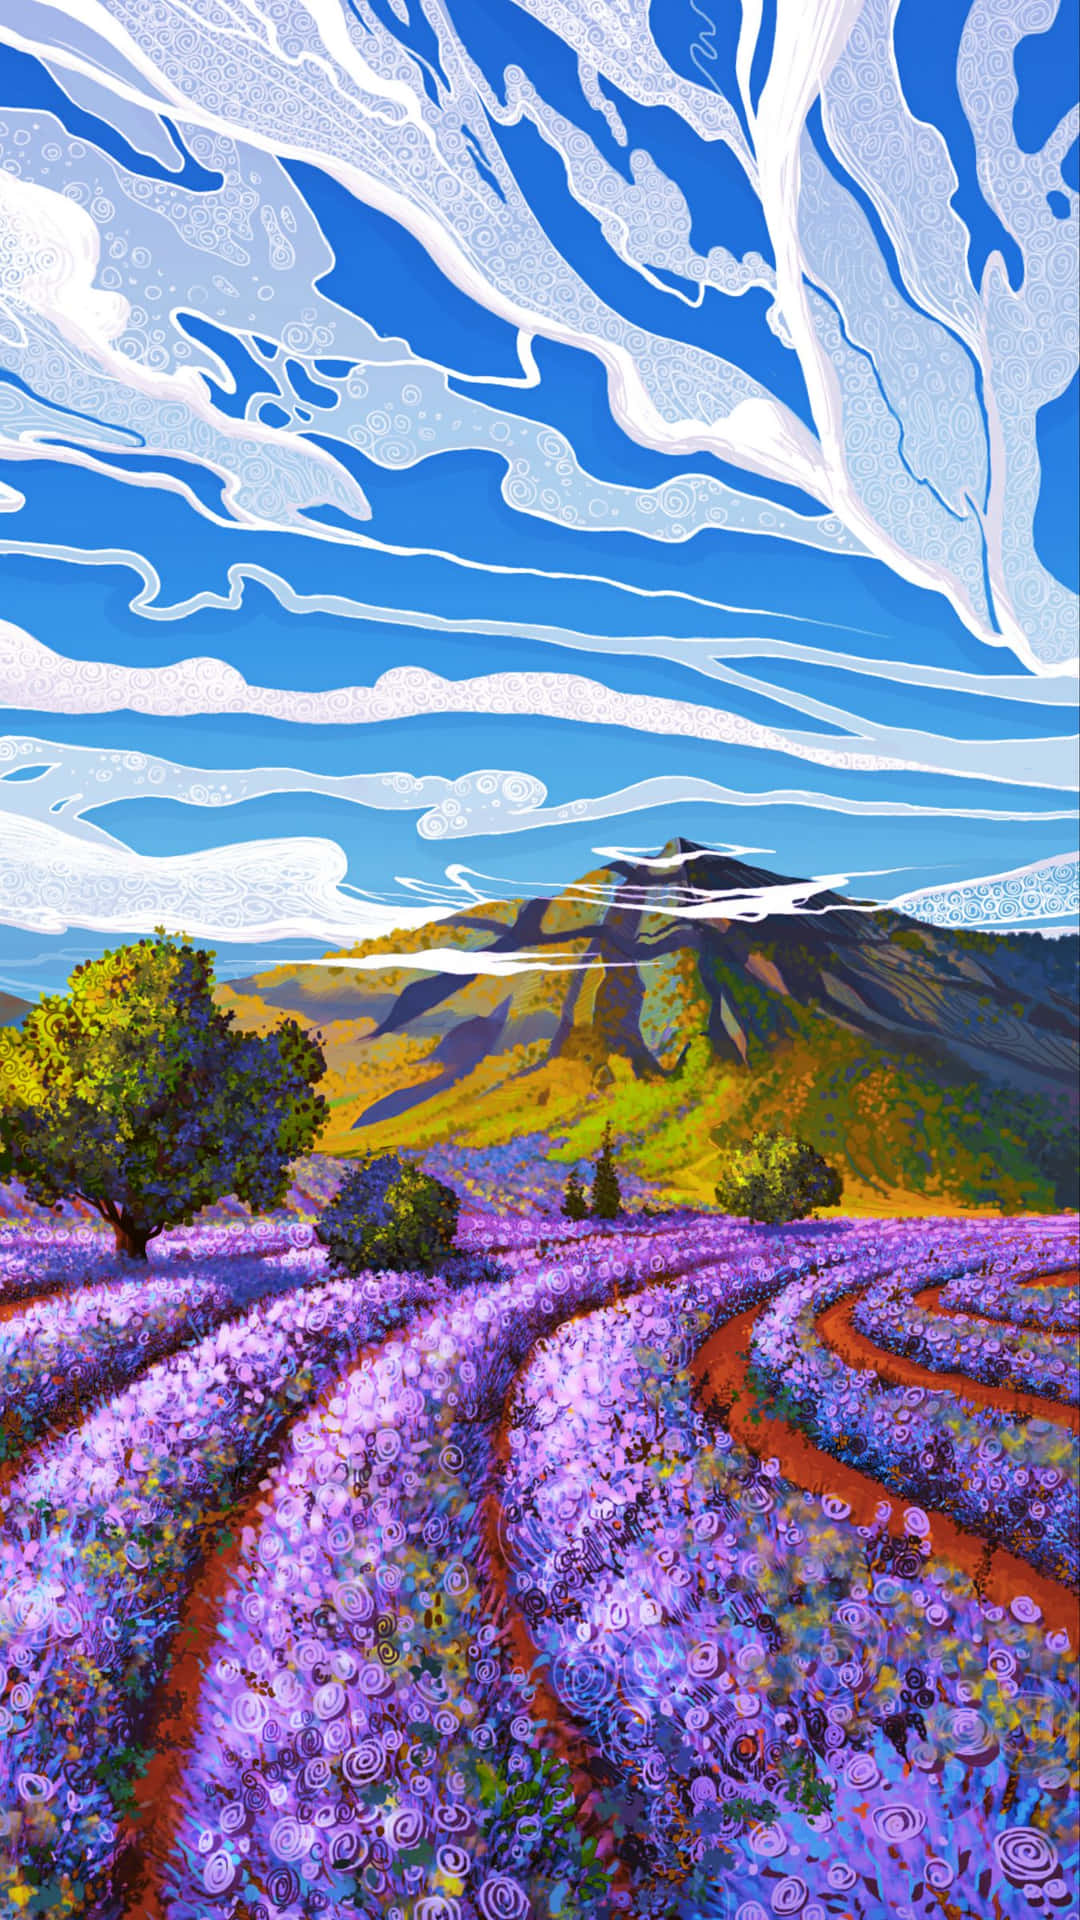 Caption: Majestic Lavender Field Blooming under the Blue Sky Wallpaper